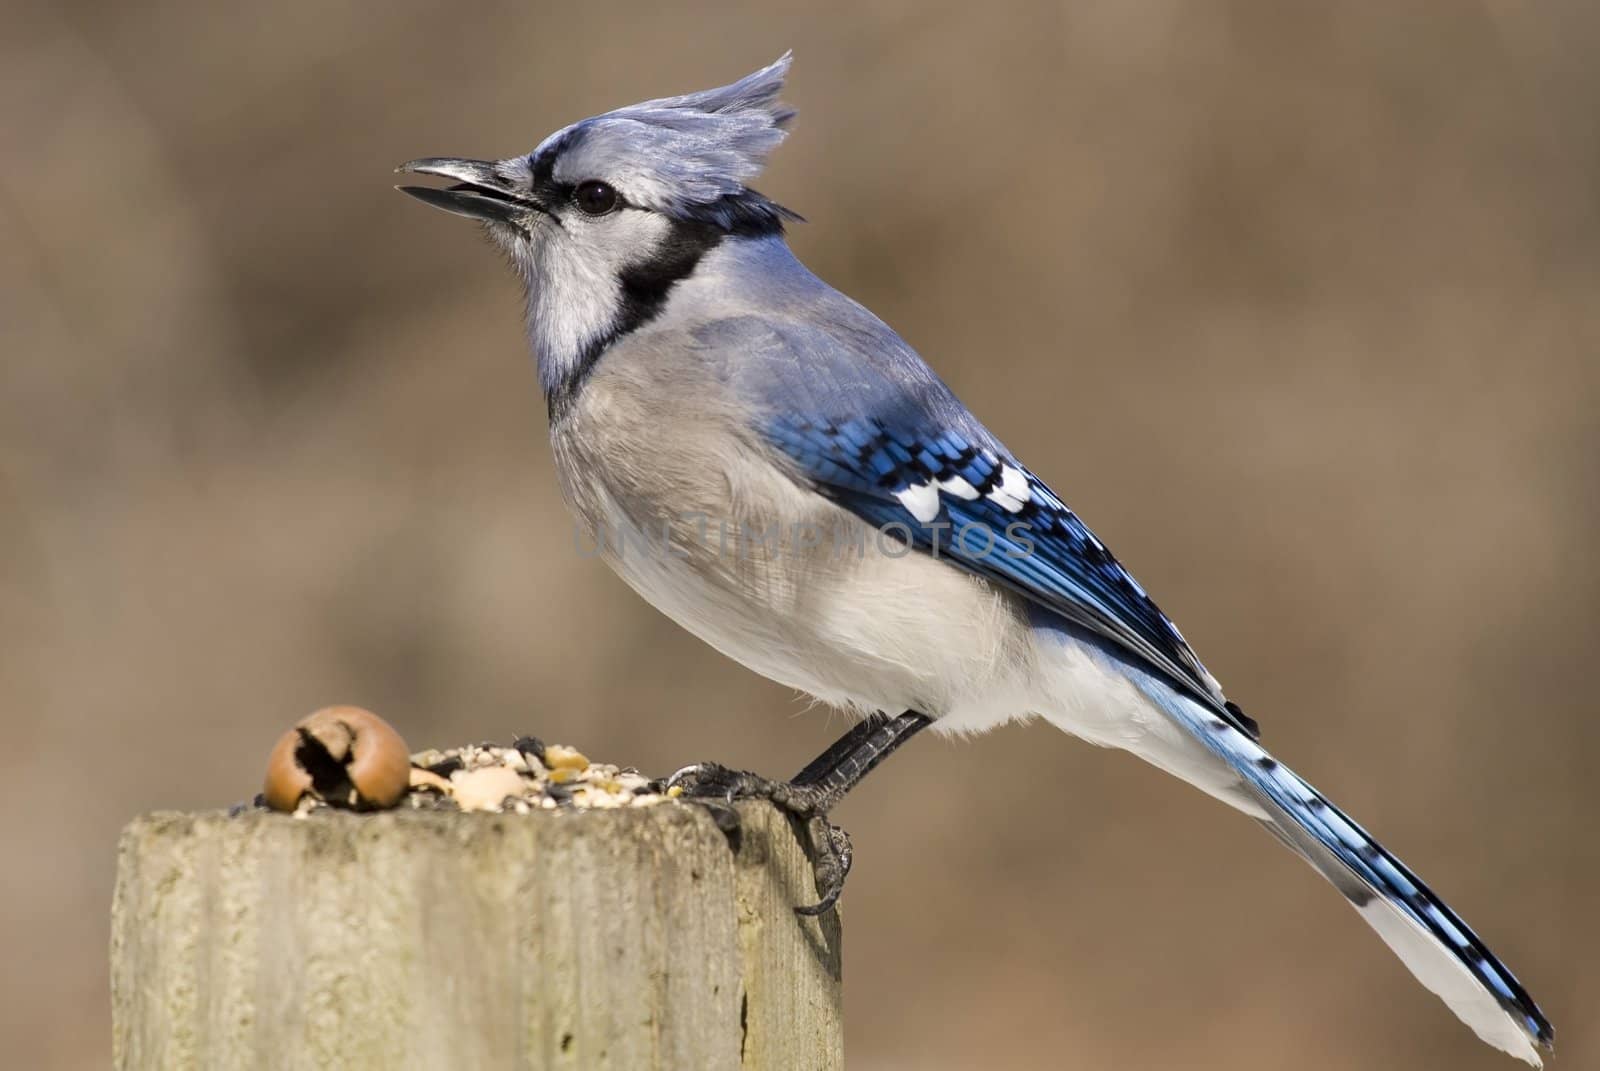 A Blue jay perched on a wooden post.